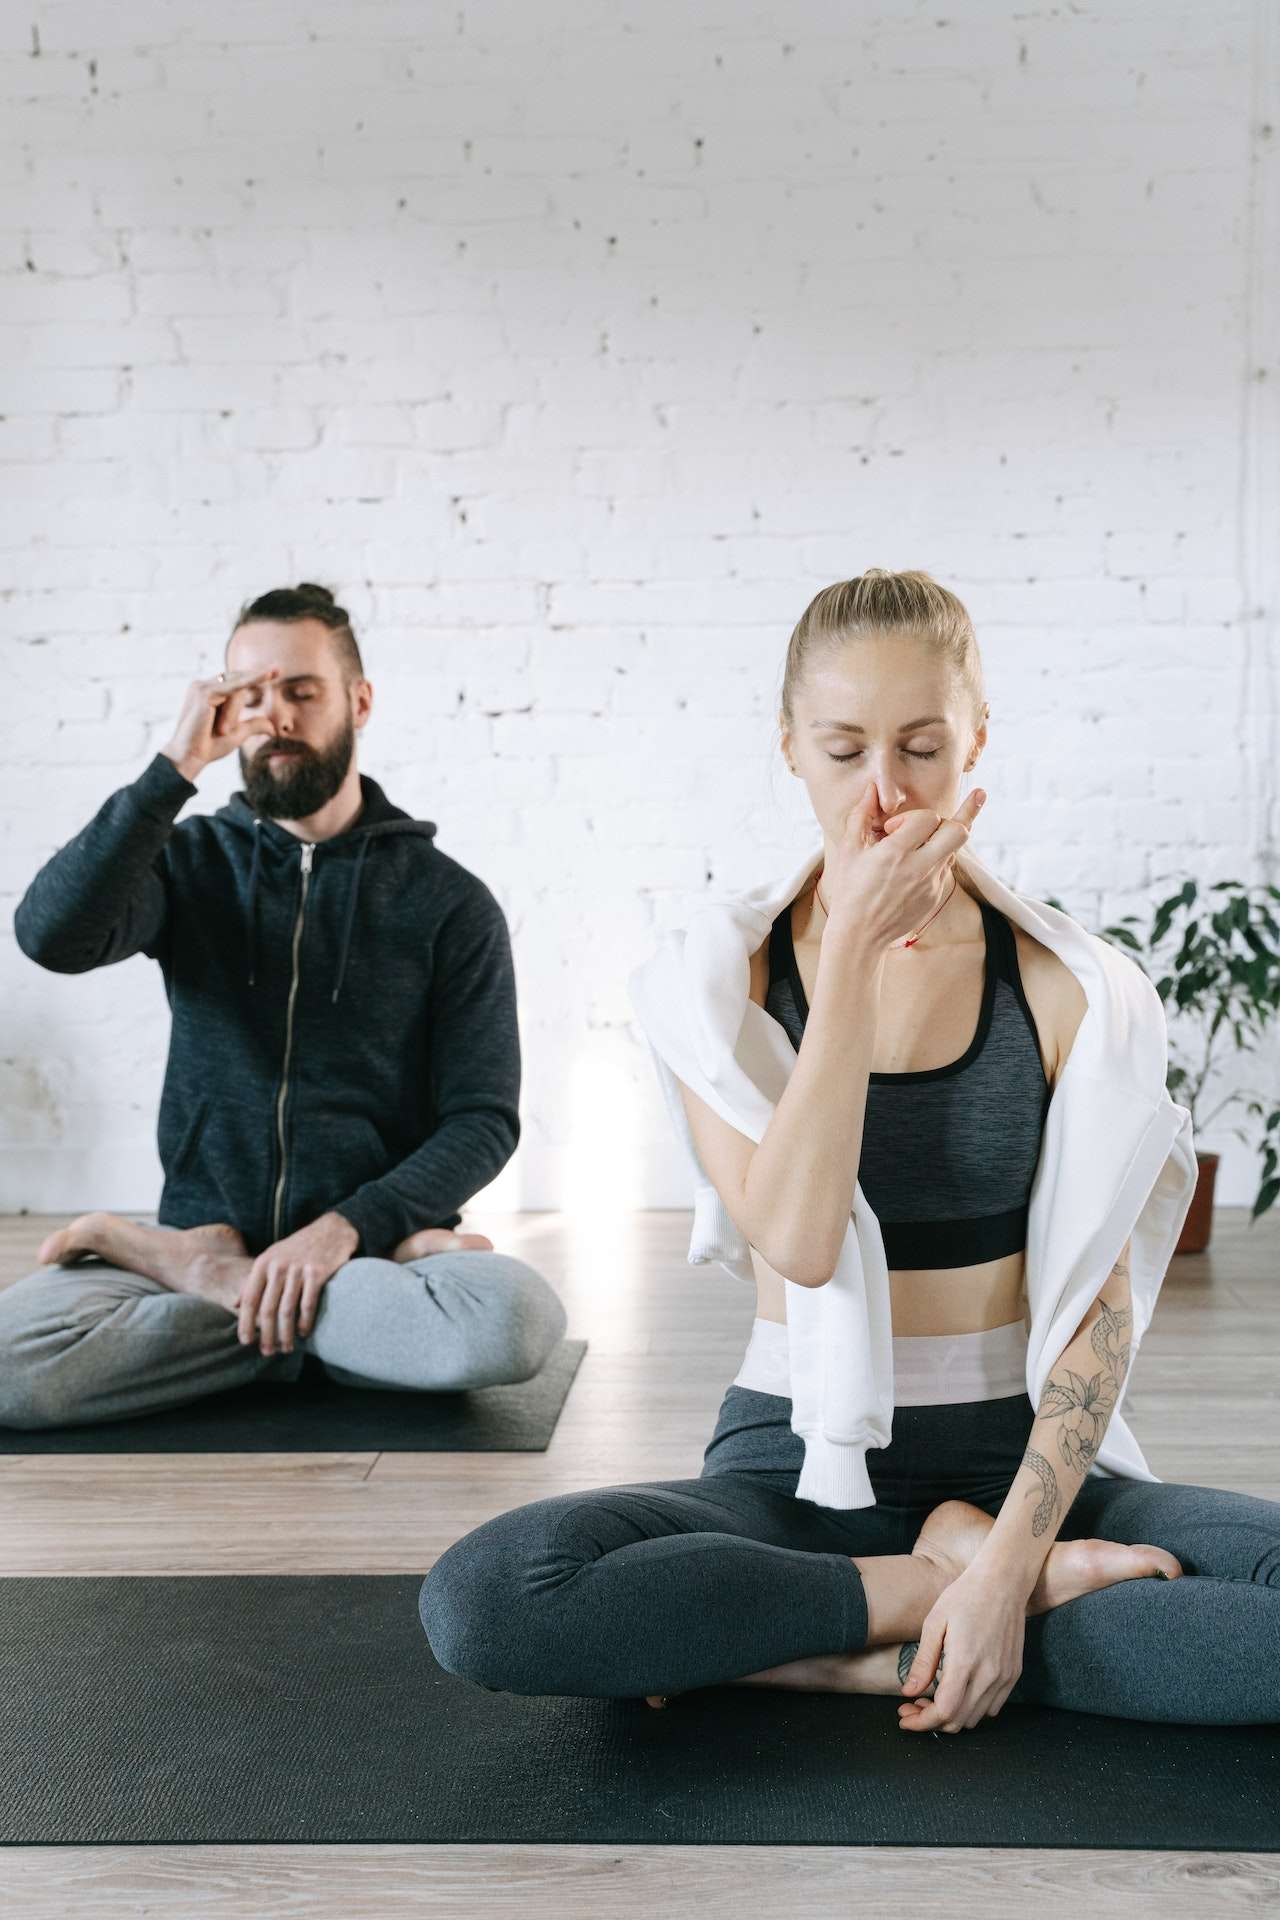 A Man and a Woman Meditating Practicing Breathing Control 